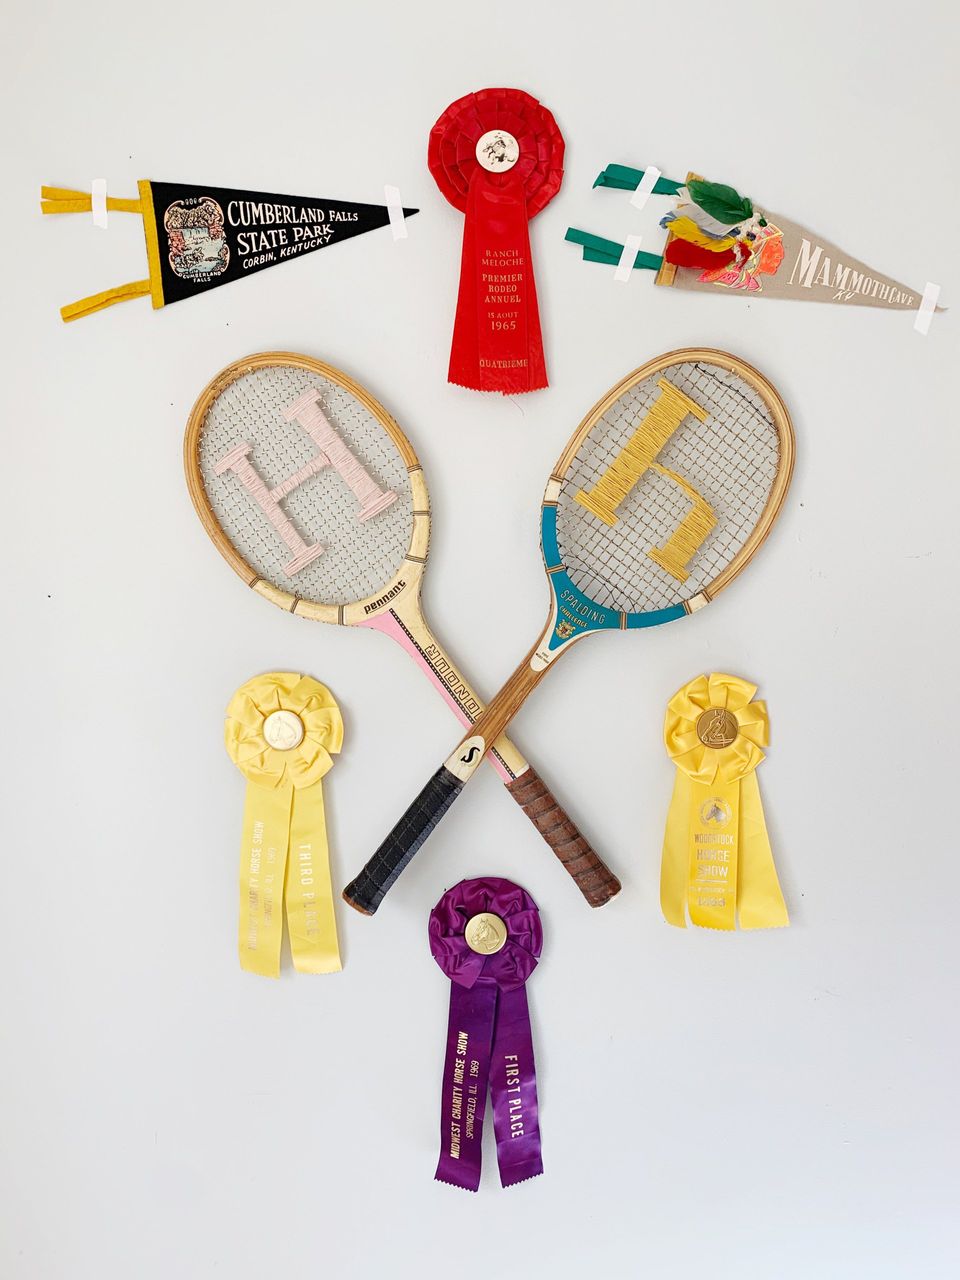 Vintage tennis rackets and vintage horse show ribbons and pennants